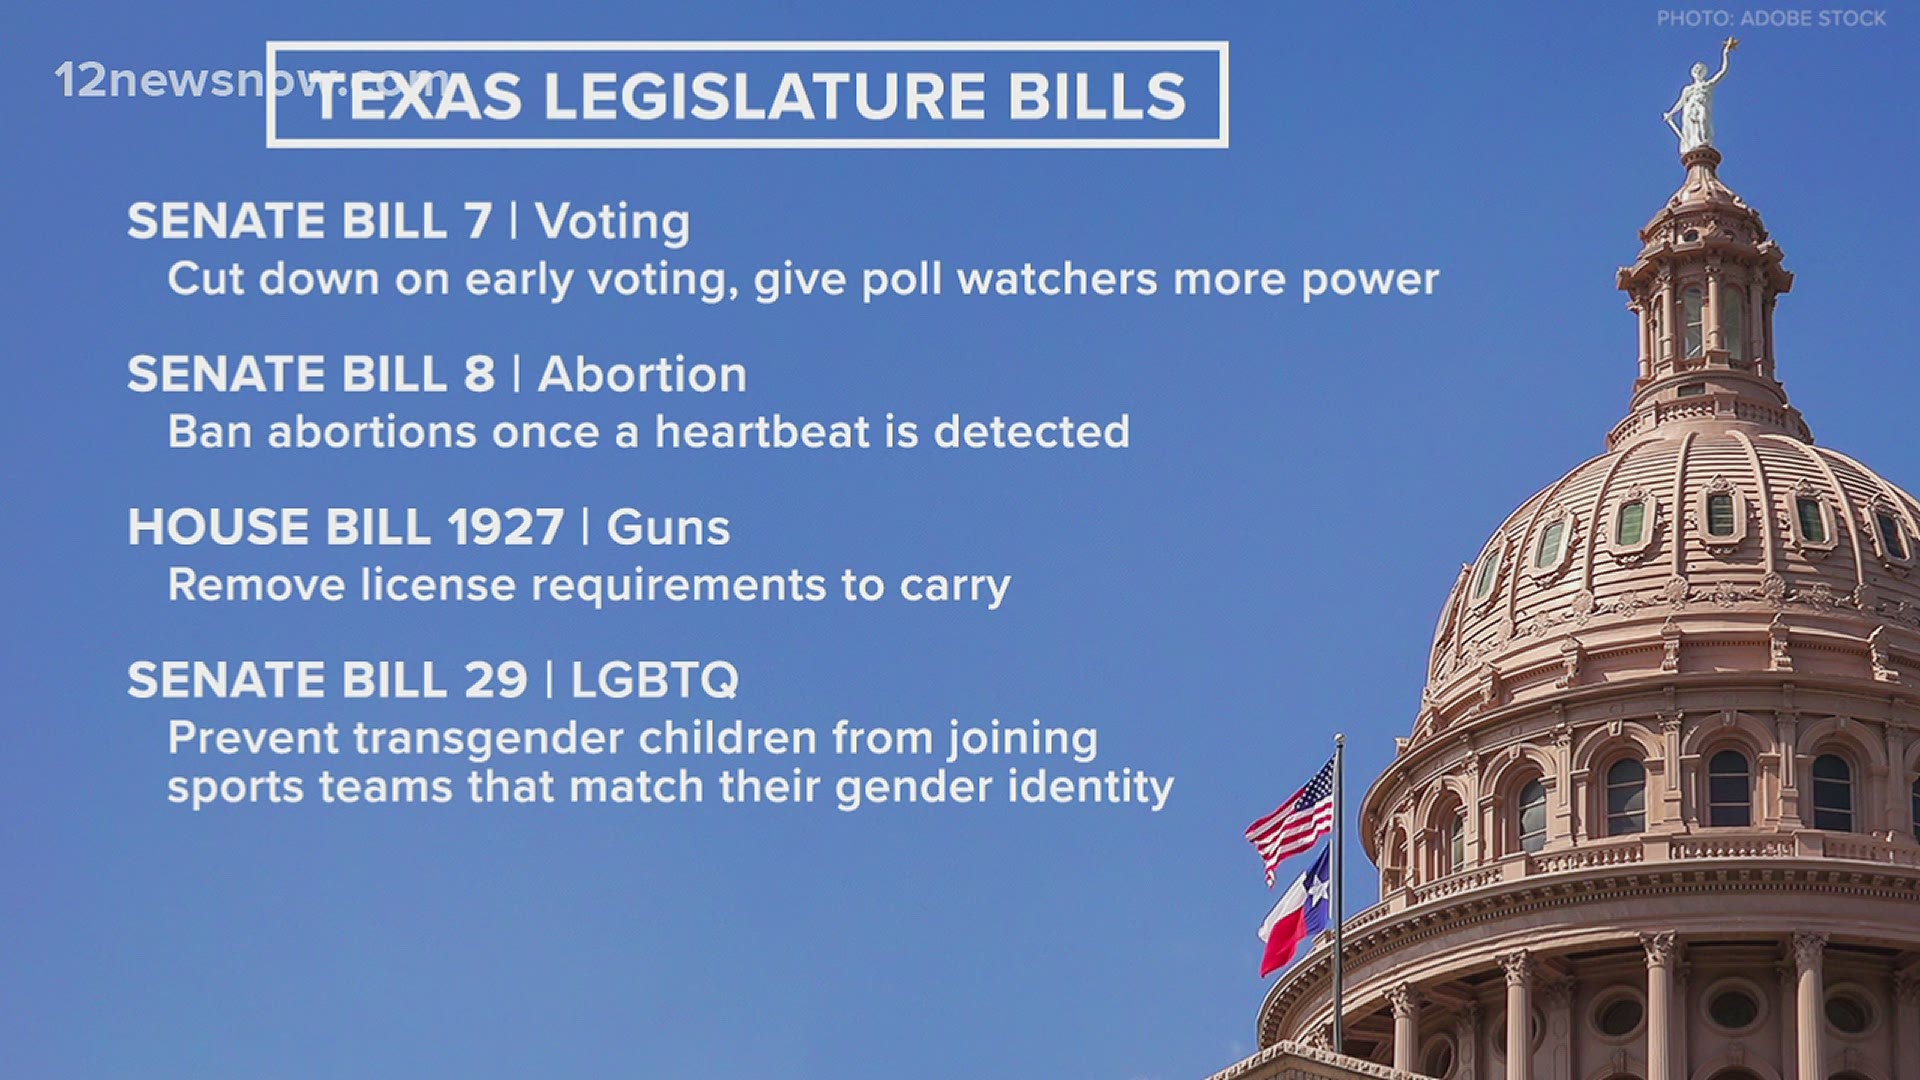 This year’s Texas legislative season has seen a number of hot topic bills introduced with plenty of debate and pushback on many of the measures.